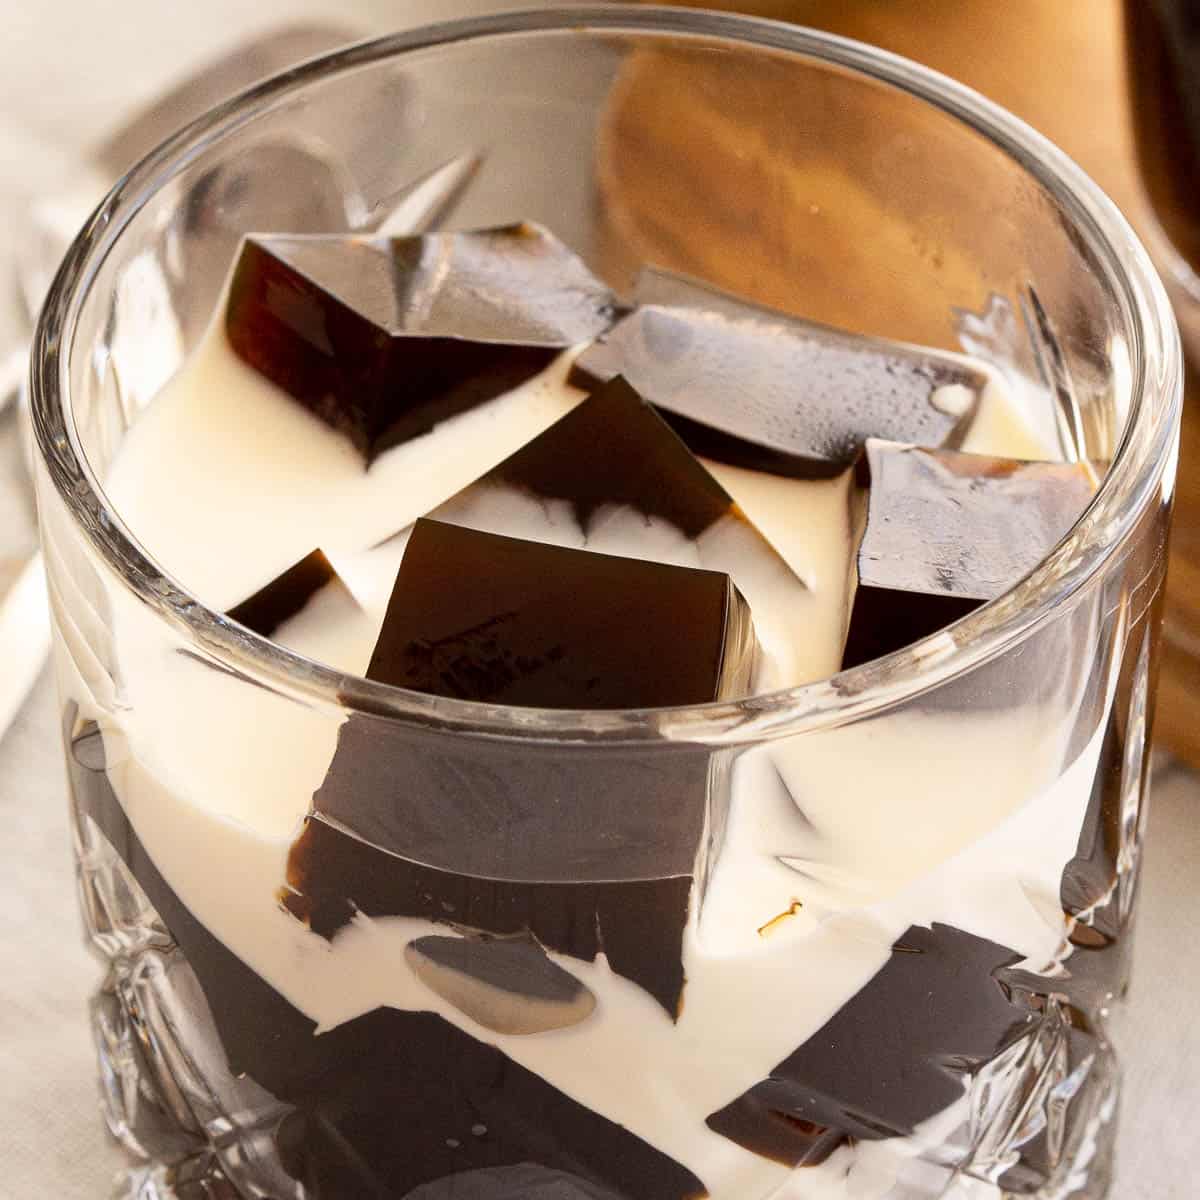 A glass filled with coffee jelly cubes and fresh cream poured over it.